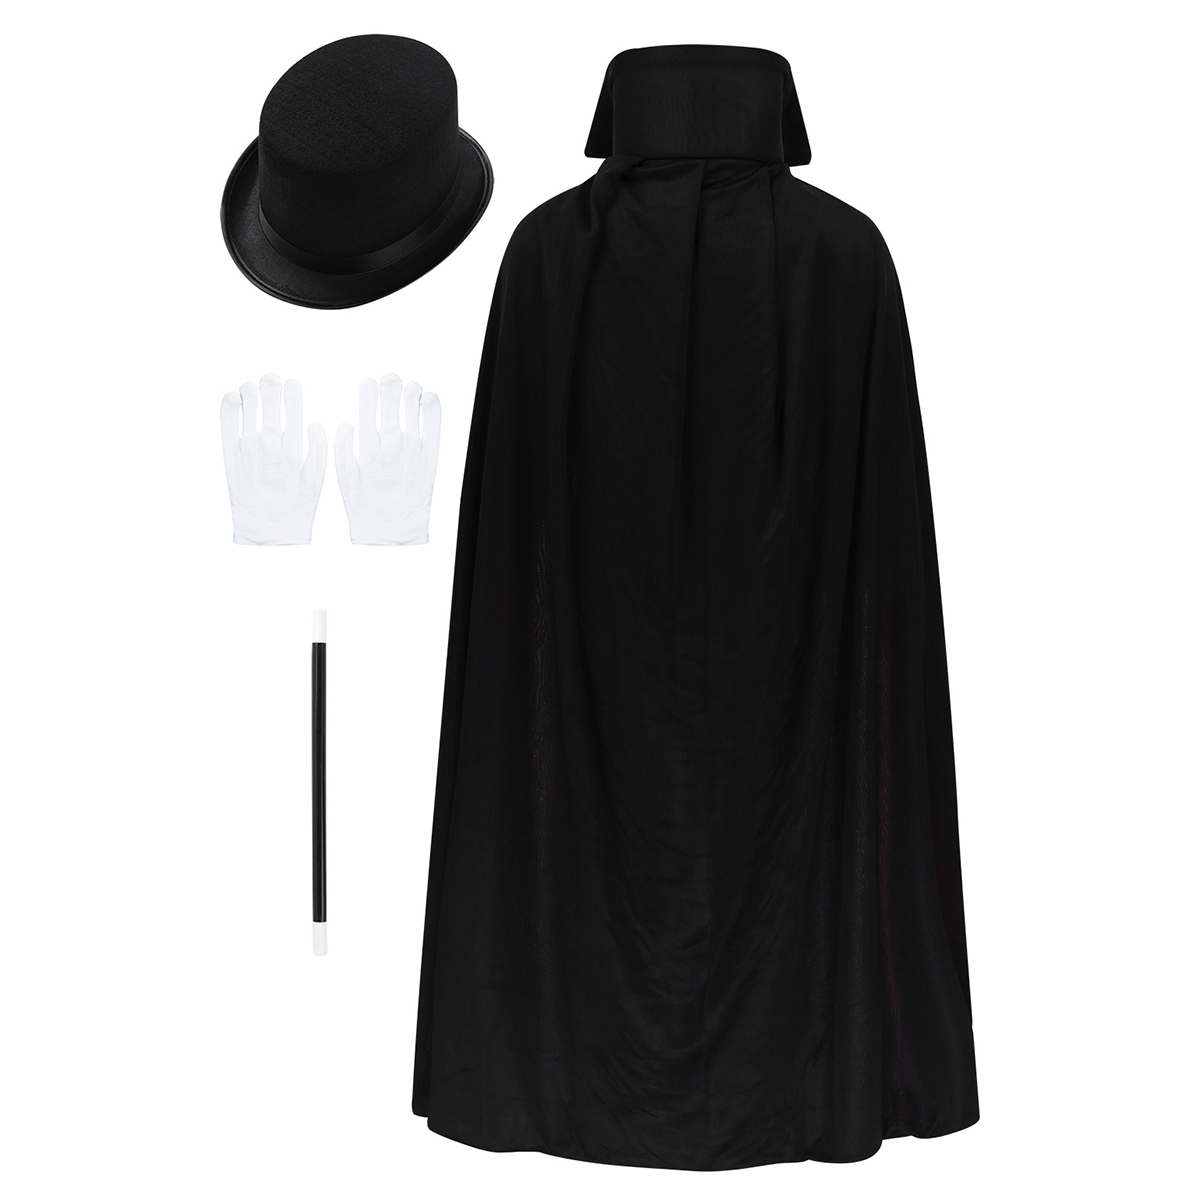 iEFiEL Magician Costume Kids Boys Girls Role Play Halloween Cosplay Fancy Dress Accessories Cape Hat Magic Wand Gloves 